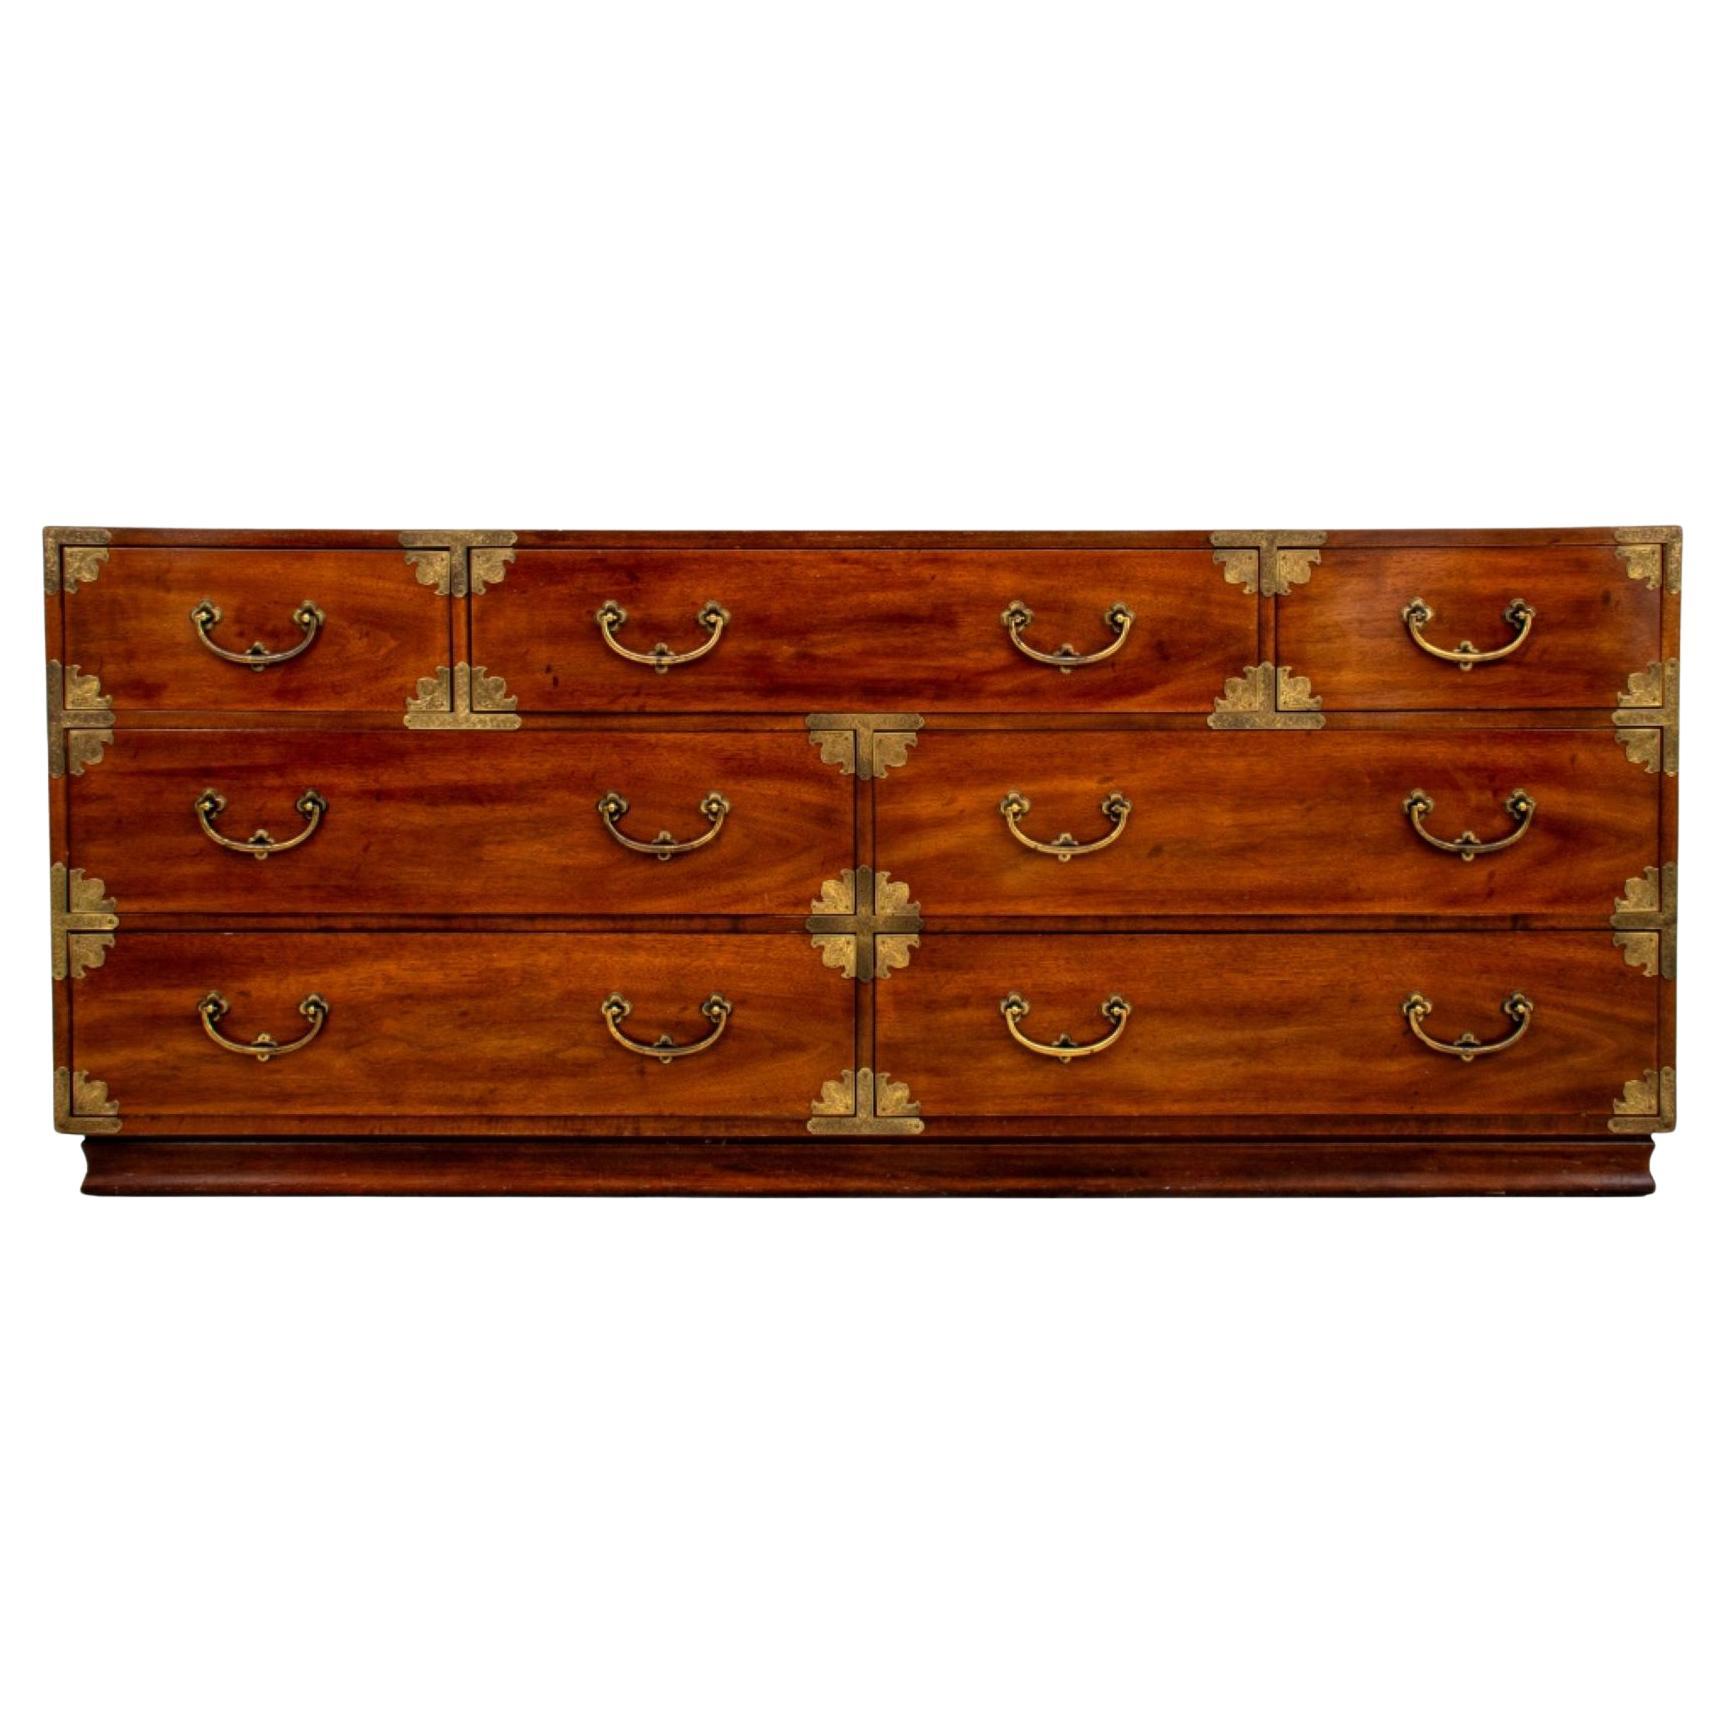 Henredon Chinese Style Chest of Drawers, 20th C